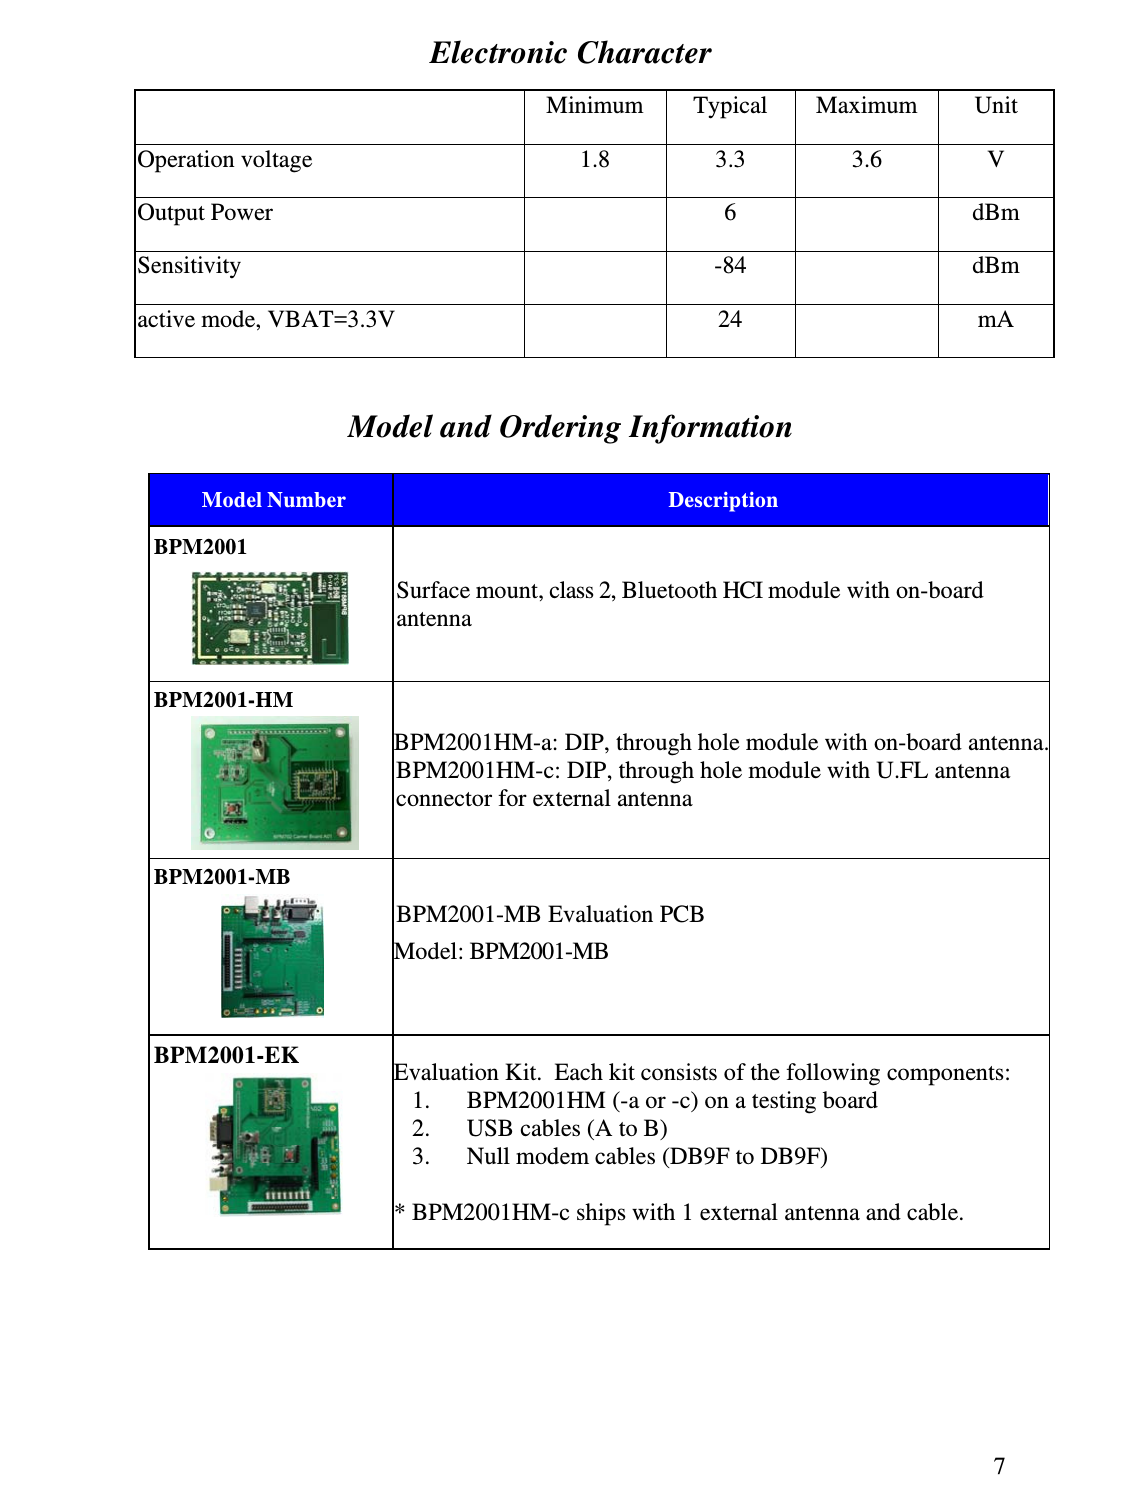 7 Electronic Character  Minimum Typical Maximum  Unit Operation voltage  1.8  3.3  3.6  V Output Power  6   dBm Sensitivity -84  dBm active mode, VBAT=3.3V  24   mA  Model and Ordering Information   Model Number  Description BPM2001  Surface mount, class 2, Bluetooth HCI module with on-board antenna BPM2001-HM  BPM2001HM-a: DIP, through hole module with on-board antenna.BPM2001HM-c: DIP, through hole module with U.FL antenna connector for external antenna BPM2001-MB  BPM2001-MB Evaluation PCB Model: BPM2001-MB   BPM2001-EK  Evaluation Kit.  Each kit consists of the following components: 1. BPM2001HM (-a or -c) on a testing board 2. USB cables (A to B) 3. Null modem cables (DB9F to DB9F)   * BPM2001HM-c ships with 1 external antenna and cable. 